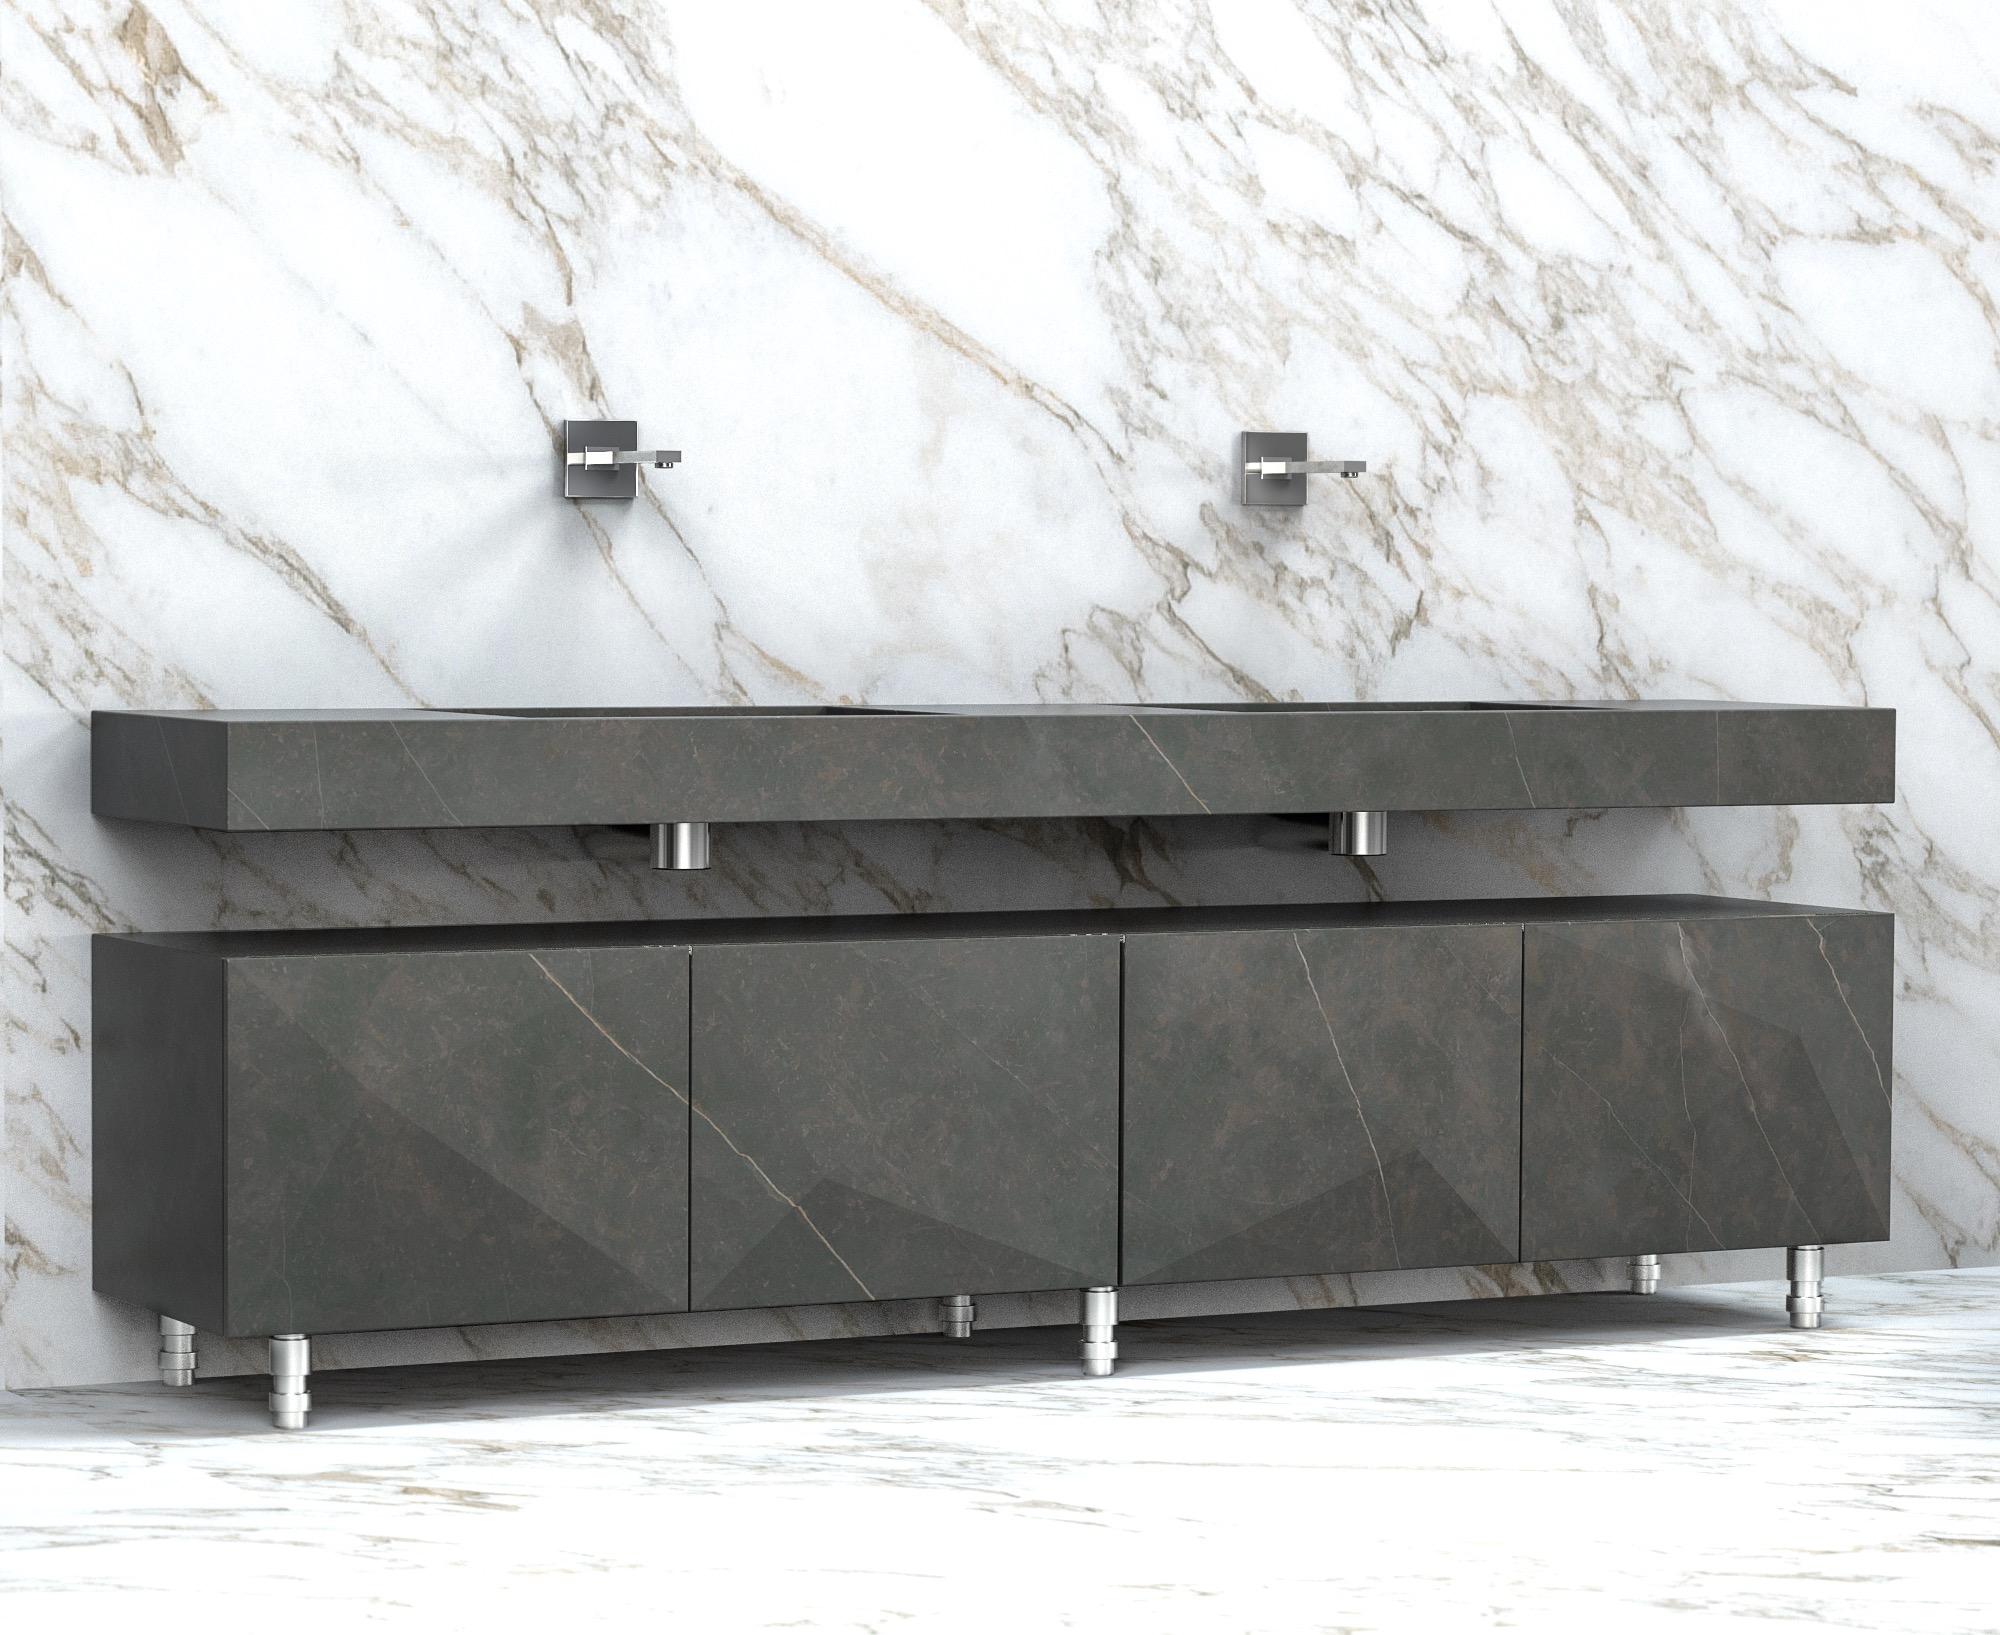 PuntaDue washbasin and cabinet II by Marmi Serafini
Materials: Nero Marquinia marble, metal.
Dimensions: D 50 x W 240 x H 85 cm (freestanding version)
Available in other marbles and in freestanding or wall versions.

Sharp but at the same time